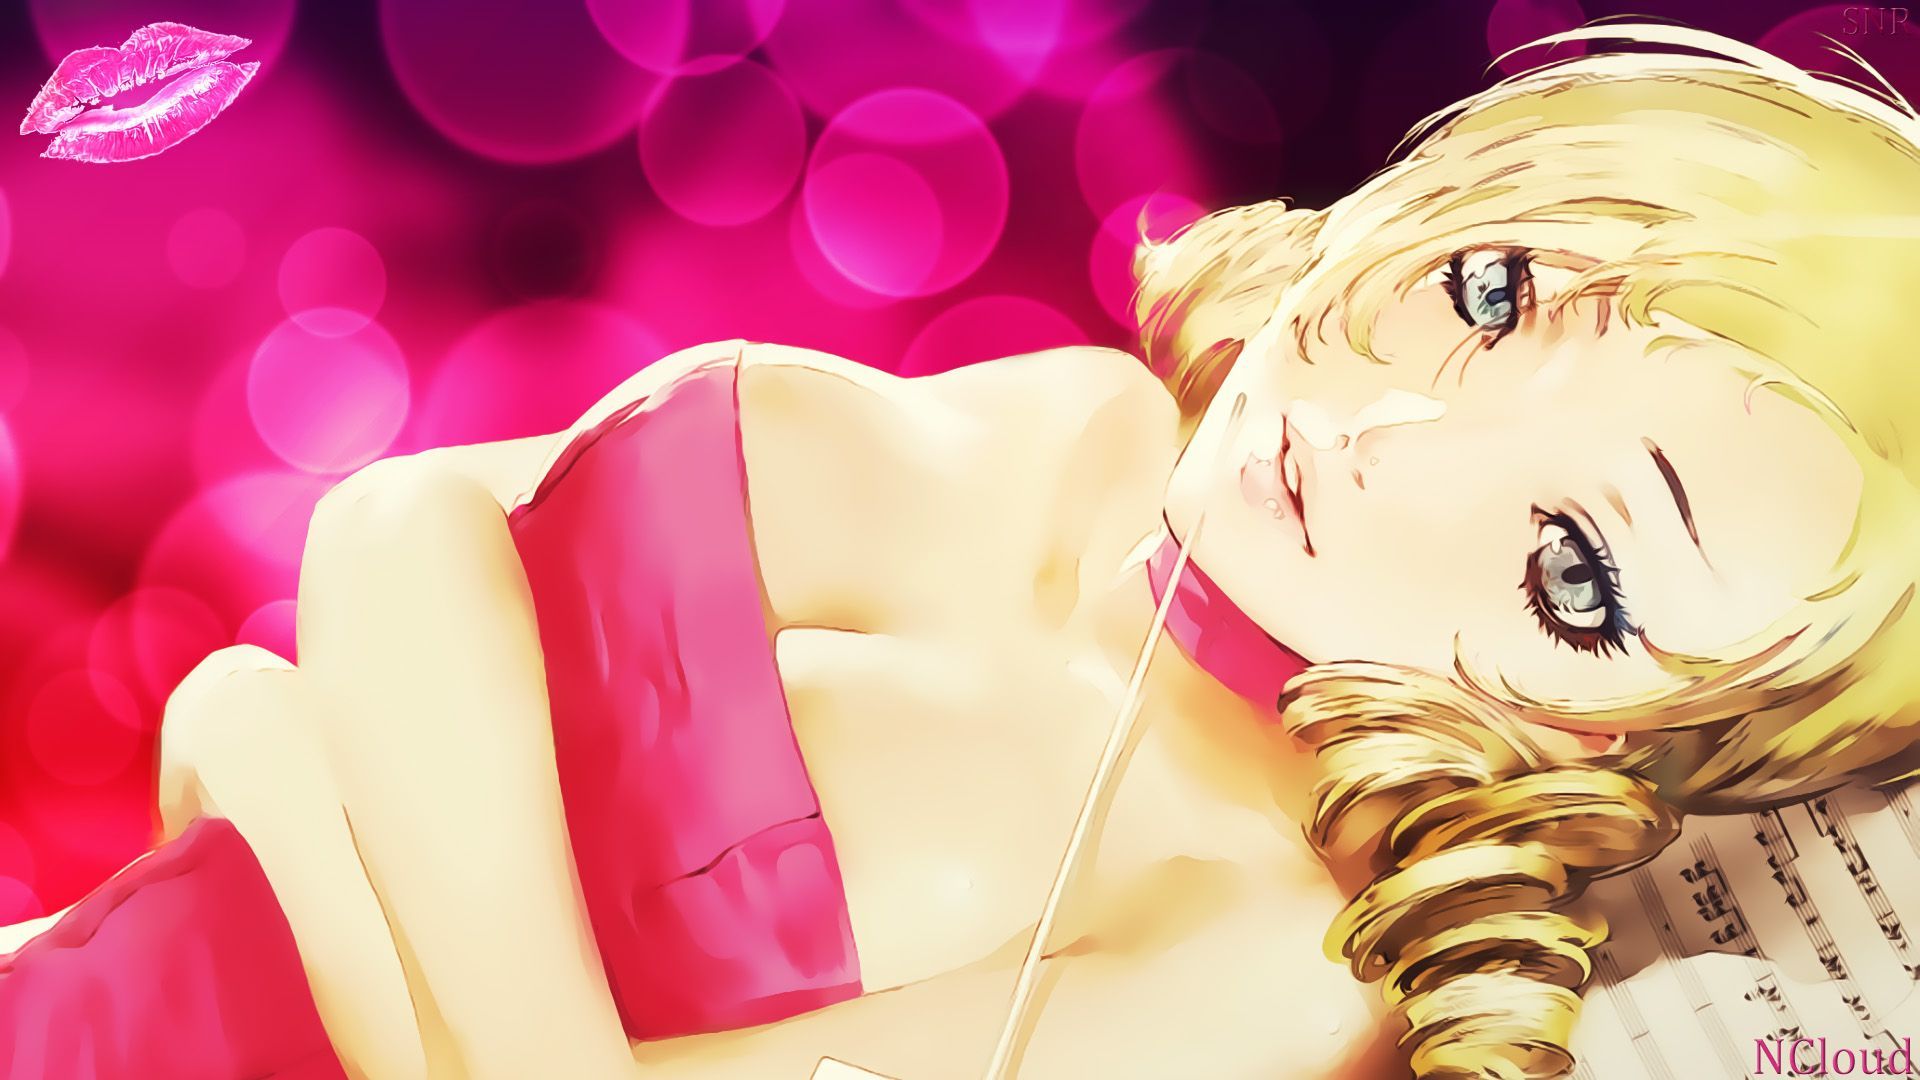 Catherine Video Game Wallpaper. Catherine game